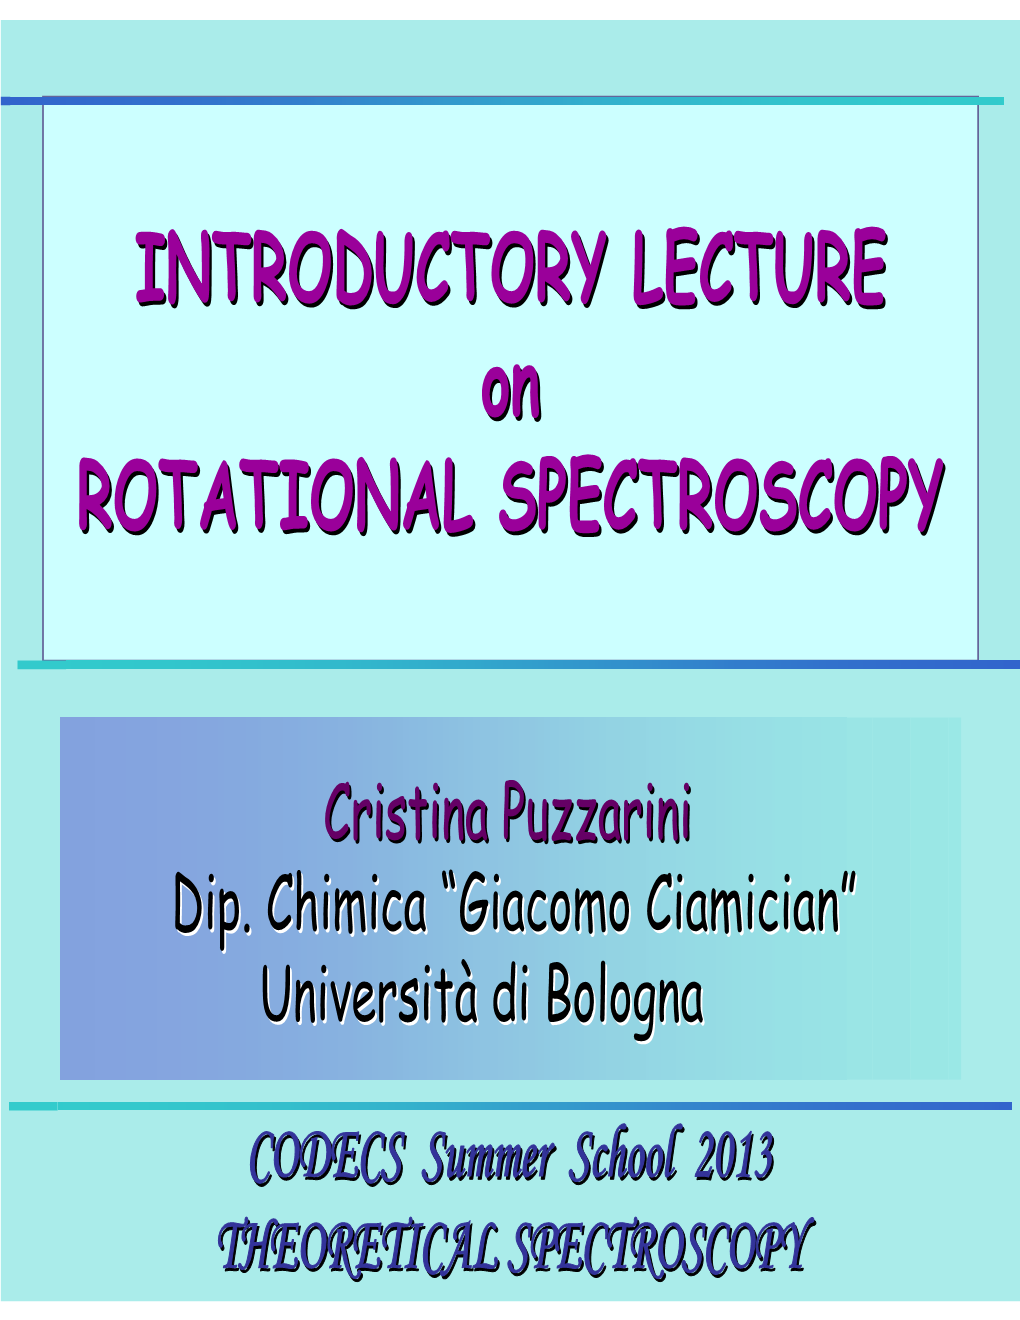 INTRODUCTORY LECTURE on ROTATIONAL SPECTROSCOPY